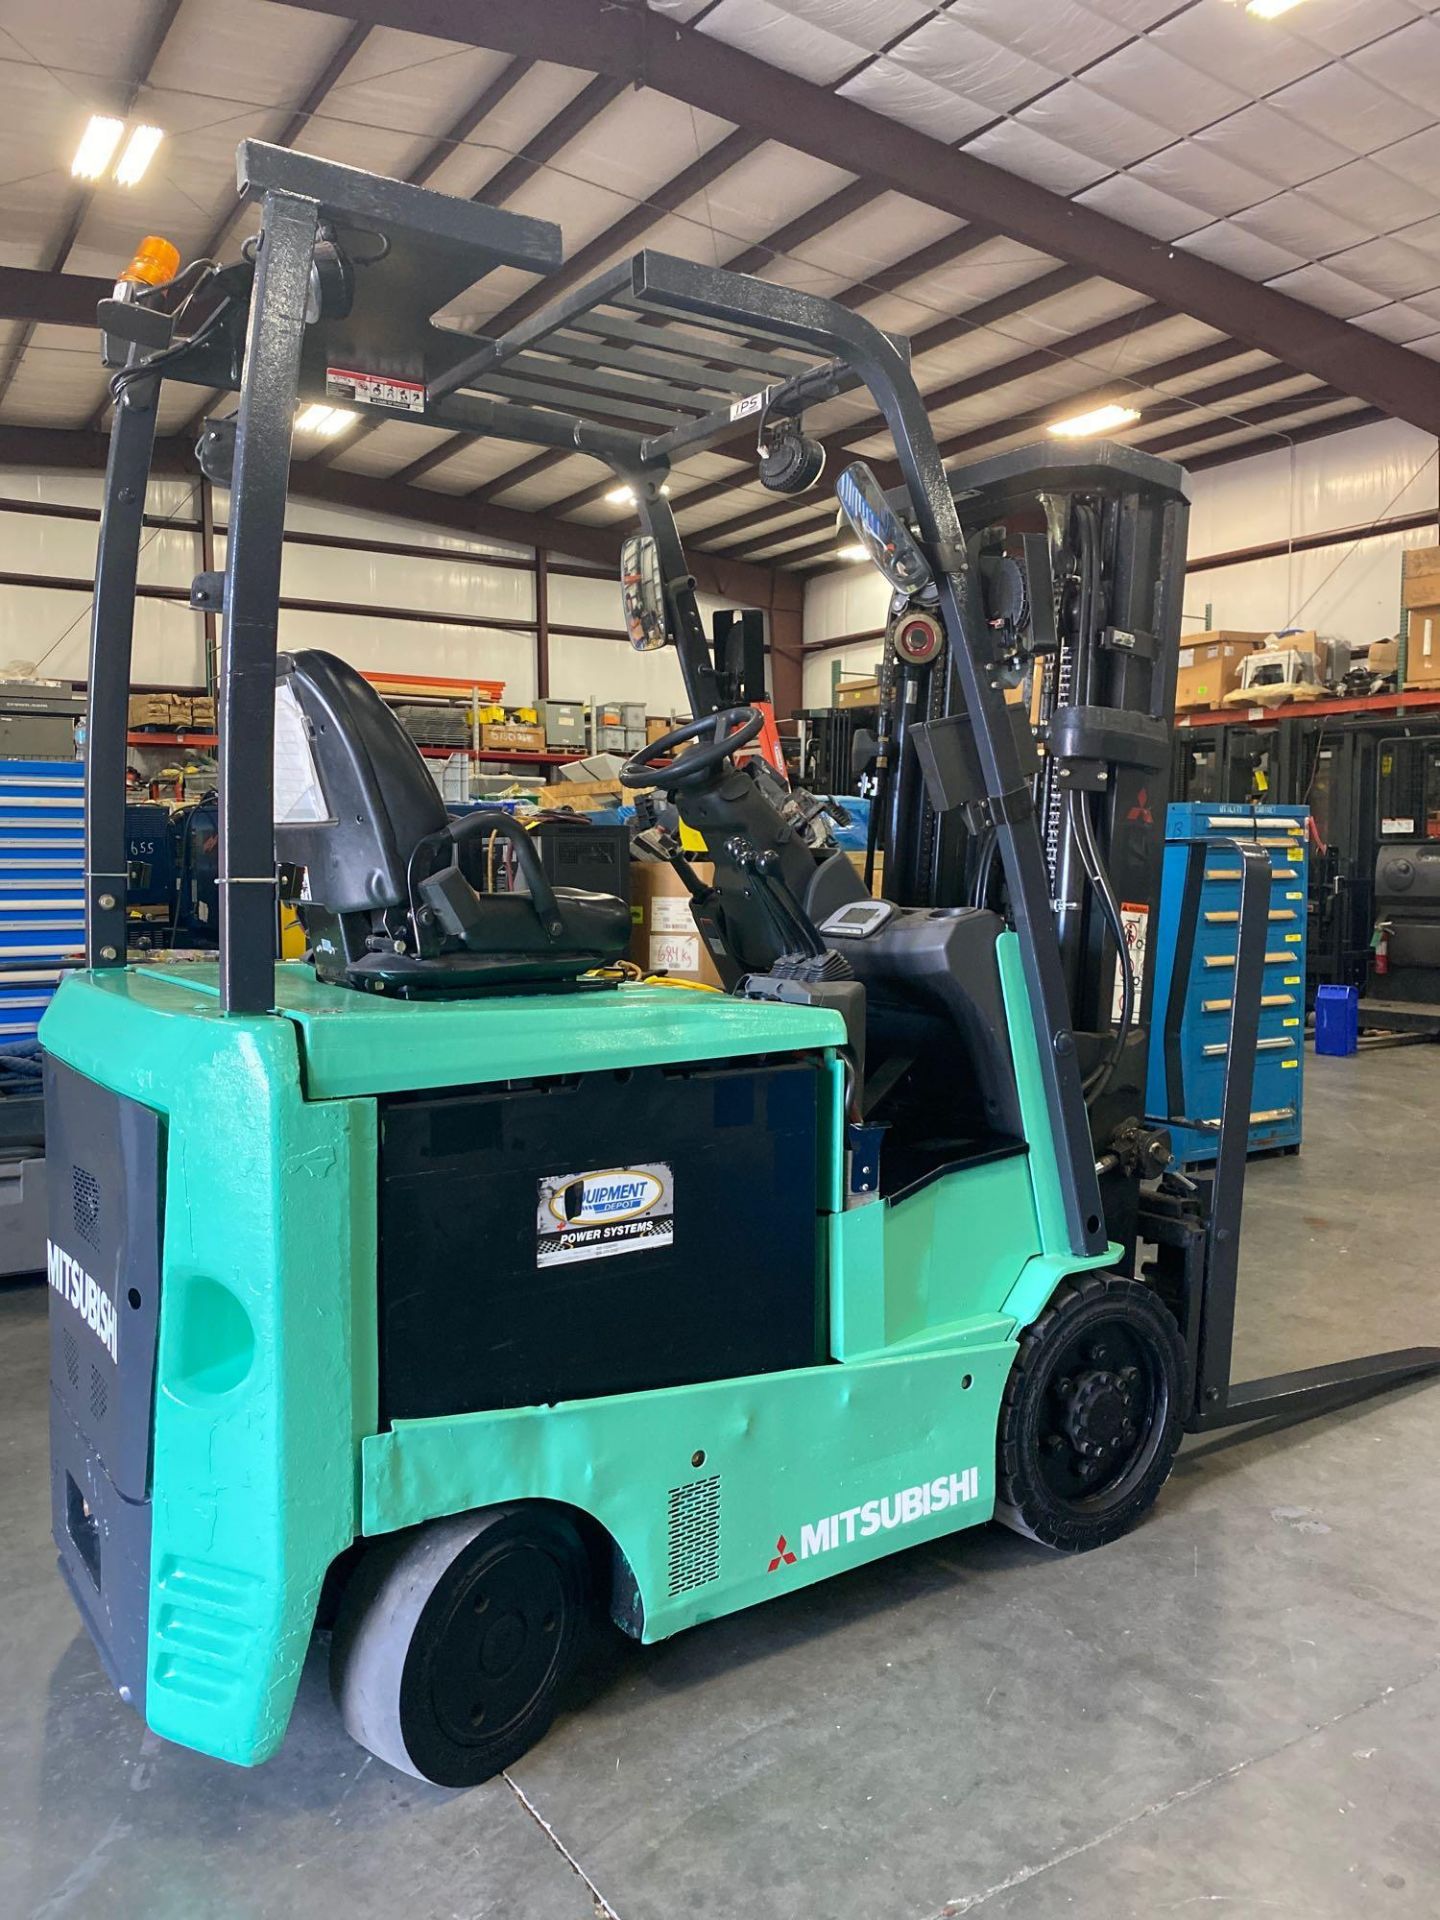 2016 MITSUBISHI FBC25N2 ELECTRIC FORKLIFT, APPROX. 4,500 LB CAPACITY - Image 2 of 7